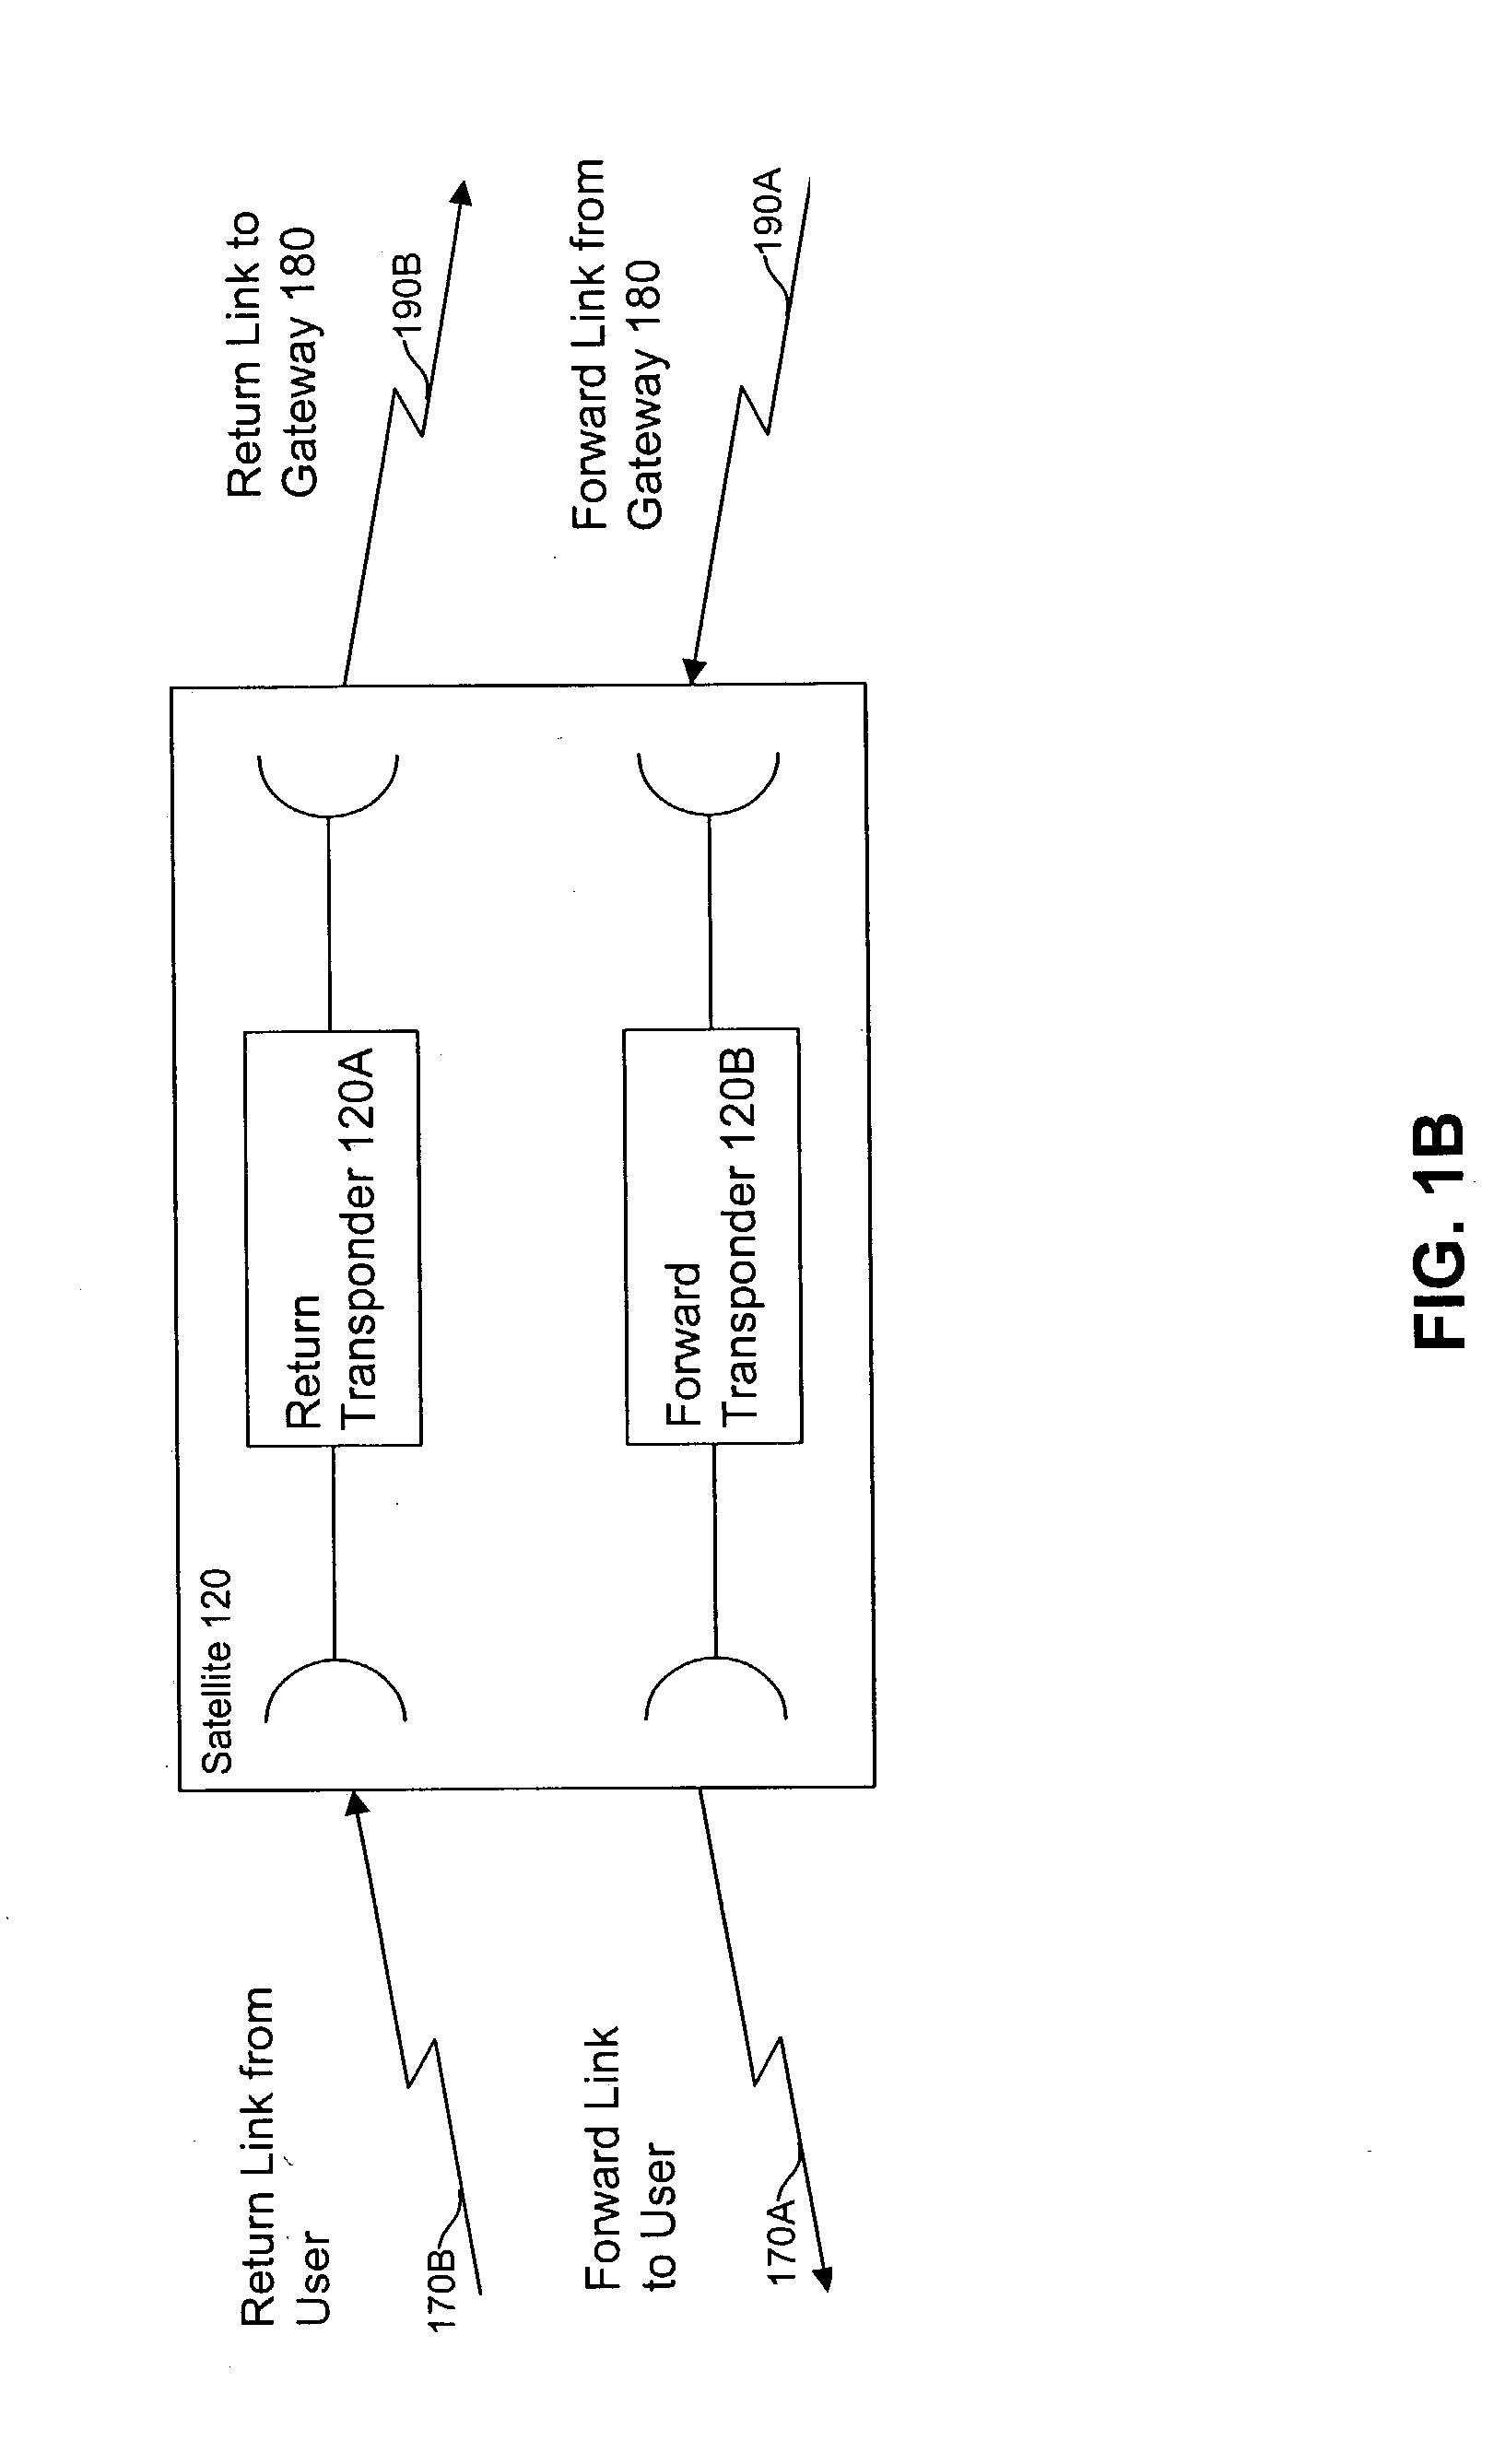 Aggregating multiple wireless communication channels for high data rate transfers